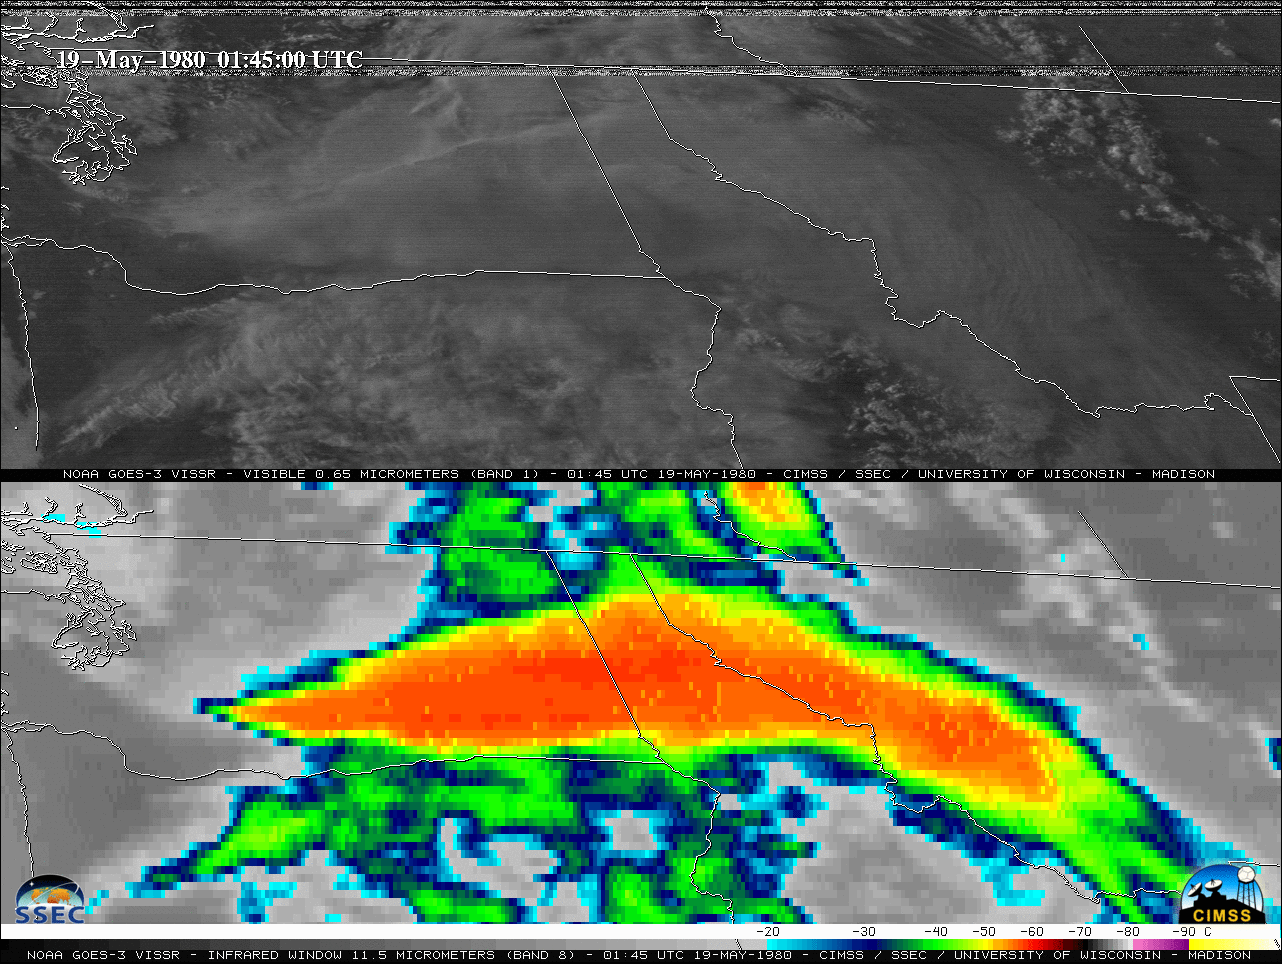 GOES-3 Visible (0.65 µm, top) and Infrared Window (11.5 µm, bottom) images [click to play animation]